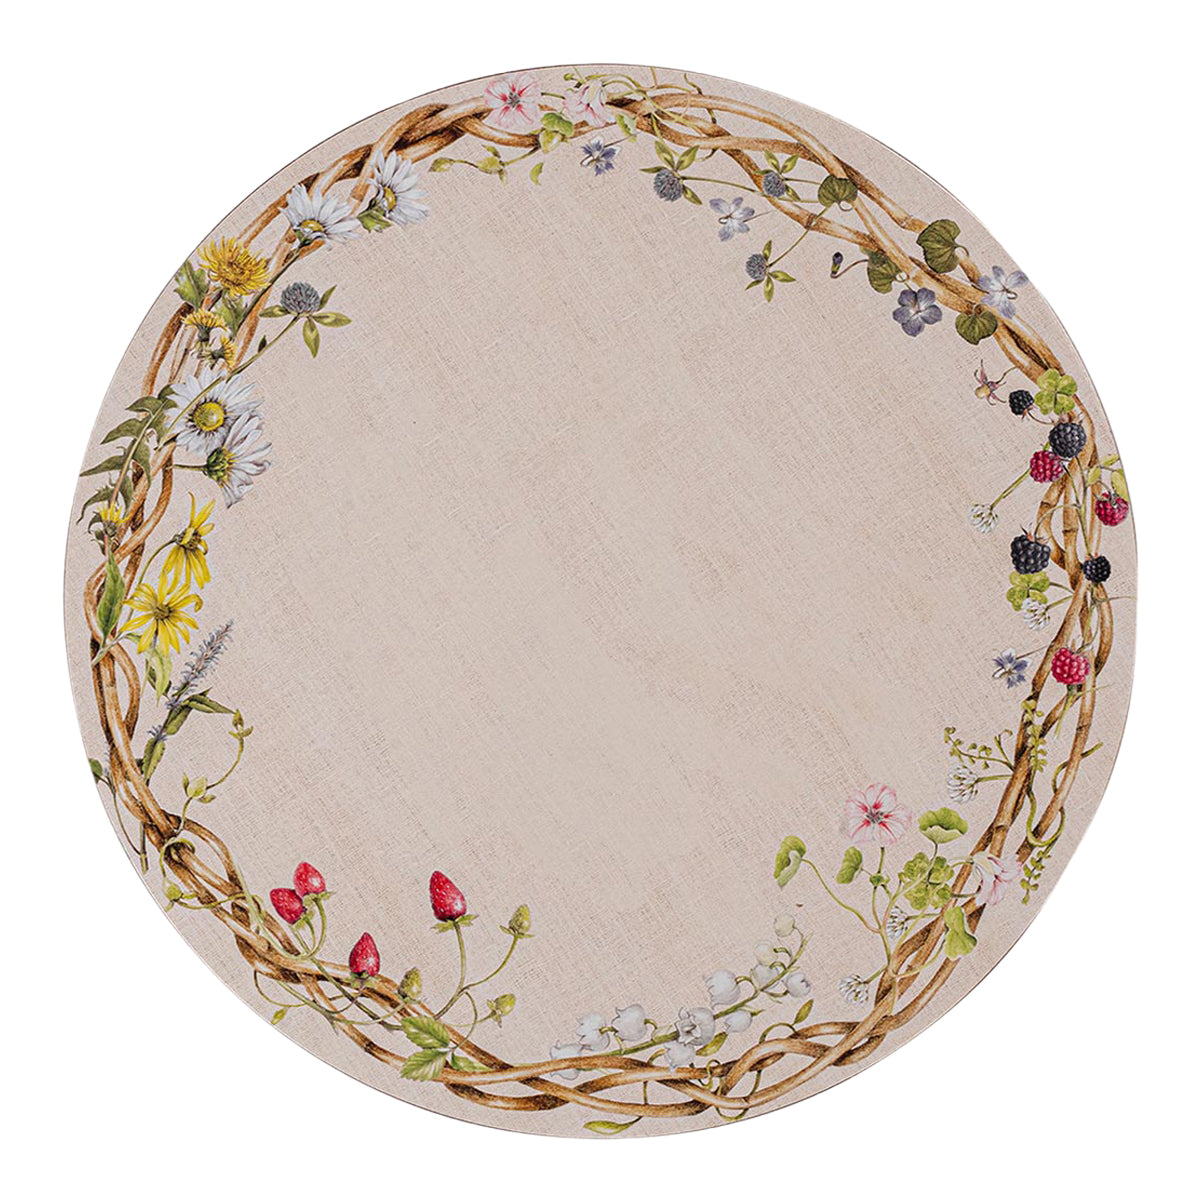 Meadow Walk Placemat - Set of 4